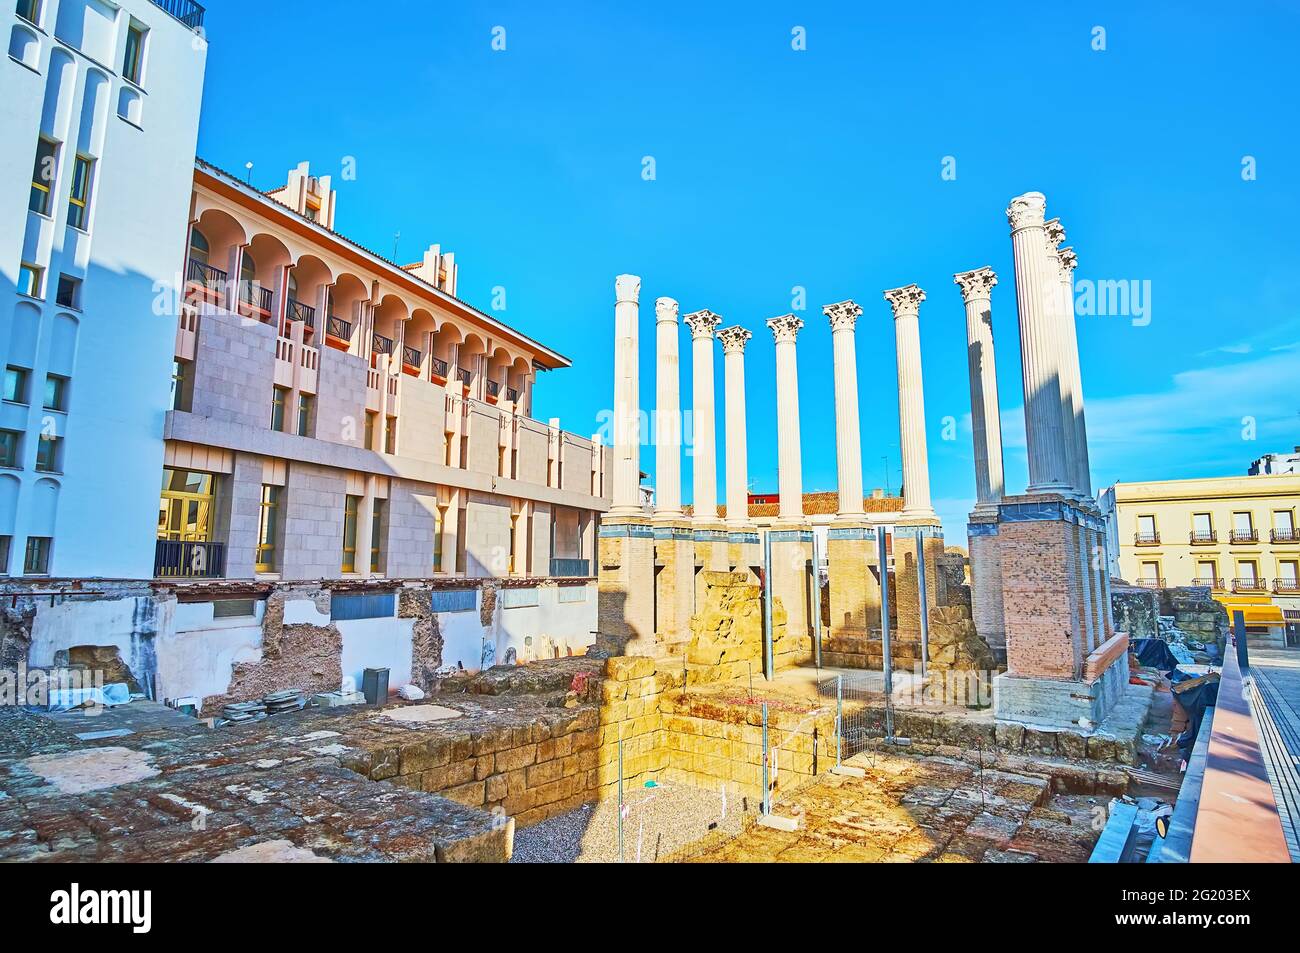 The archaeological site in old town with ruins of the antique Roman Temple, Calle Capitulares, Cordoba, Spain Stock Photo